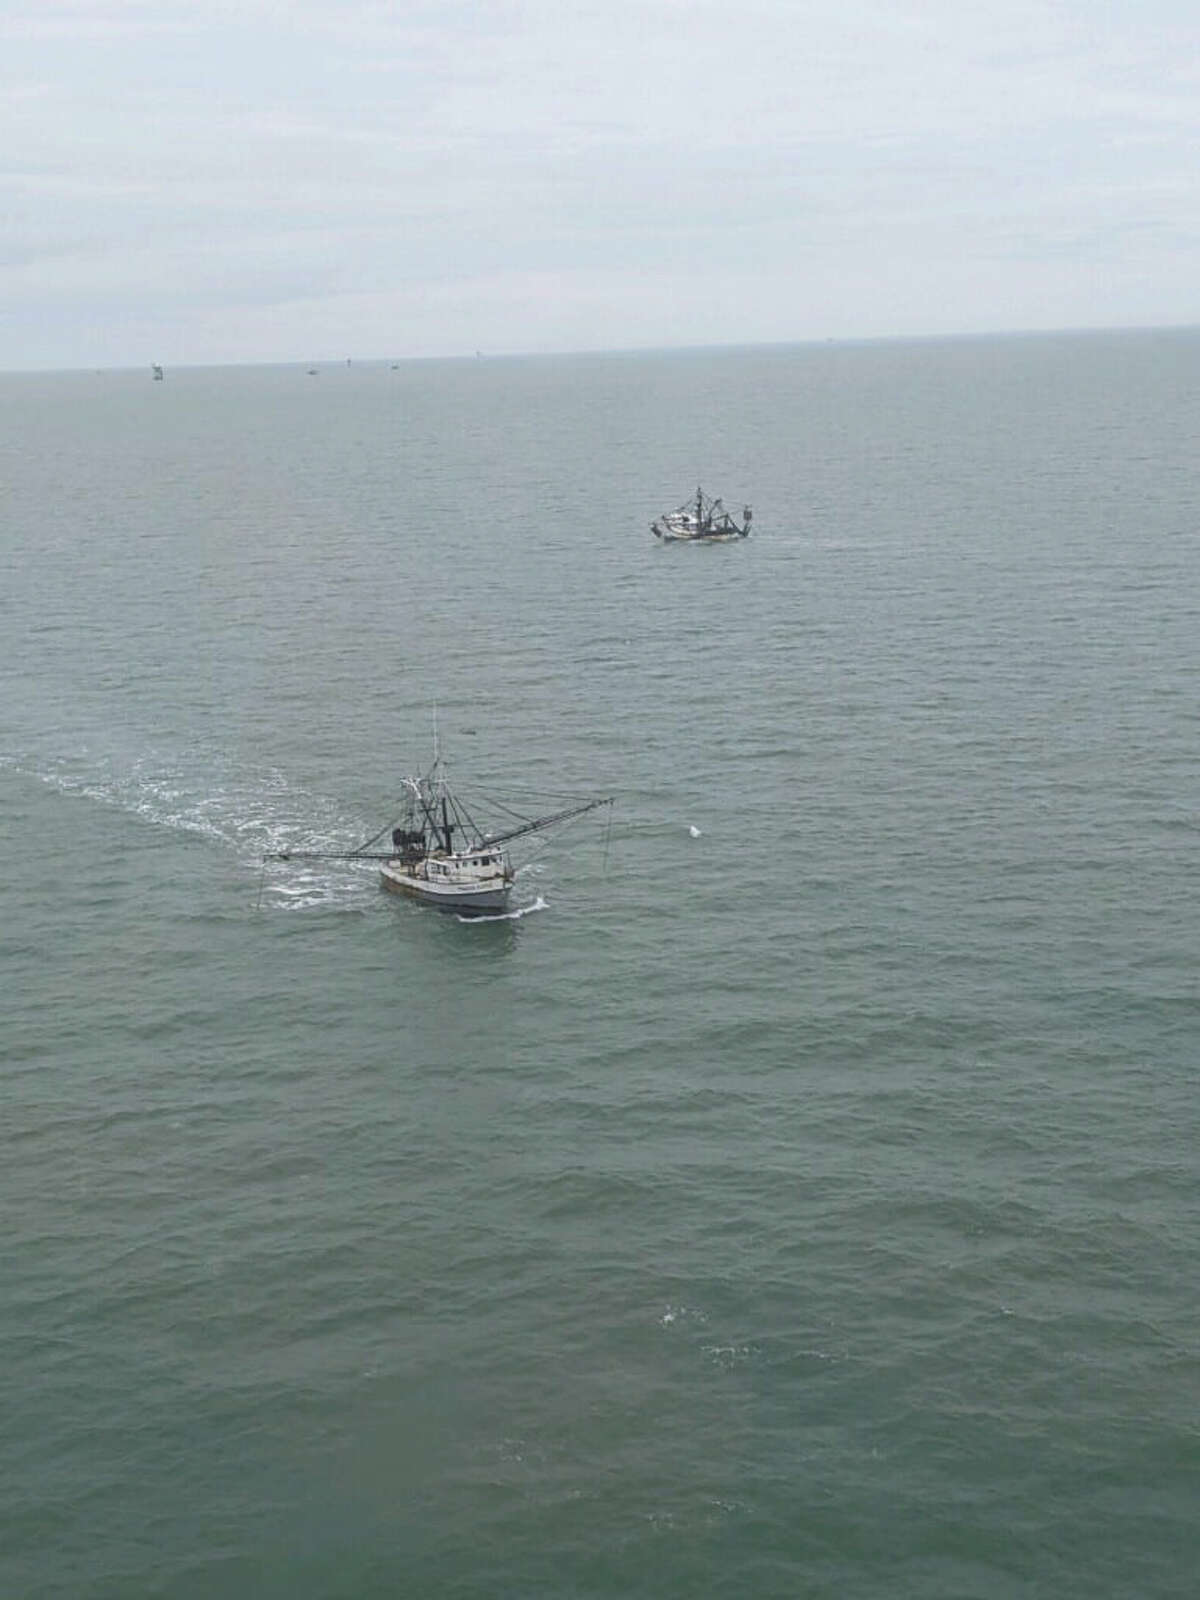 The Coast Guard has suspended its search for a missing shrimp boat captain who fell overboard near Port Aransas.